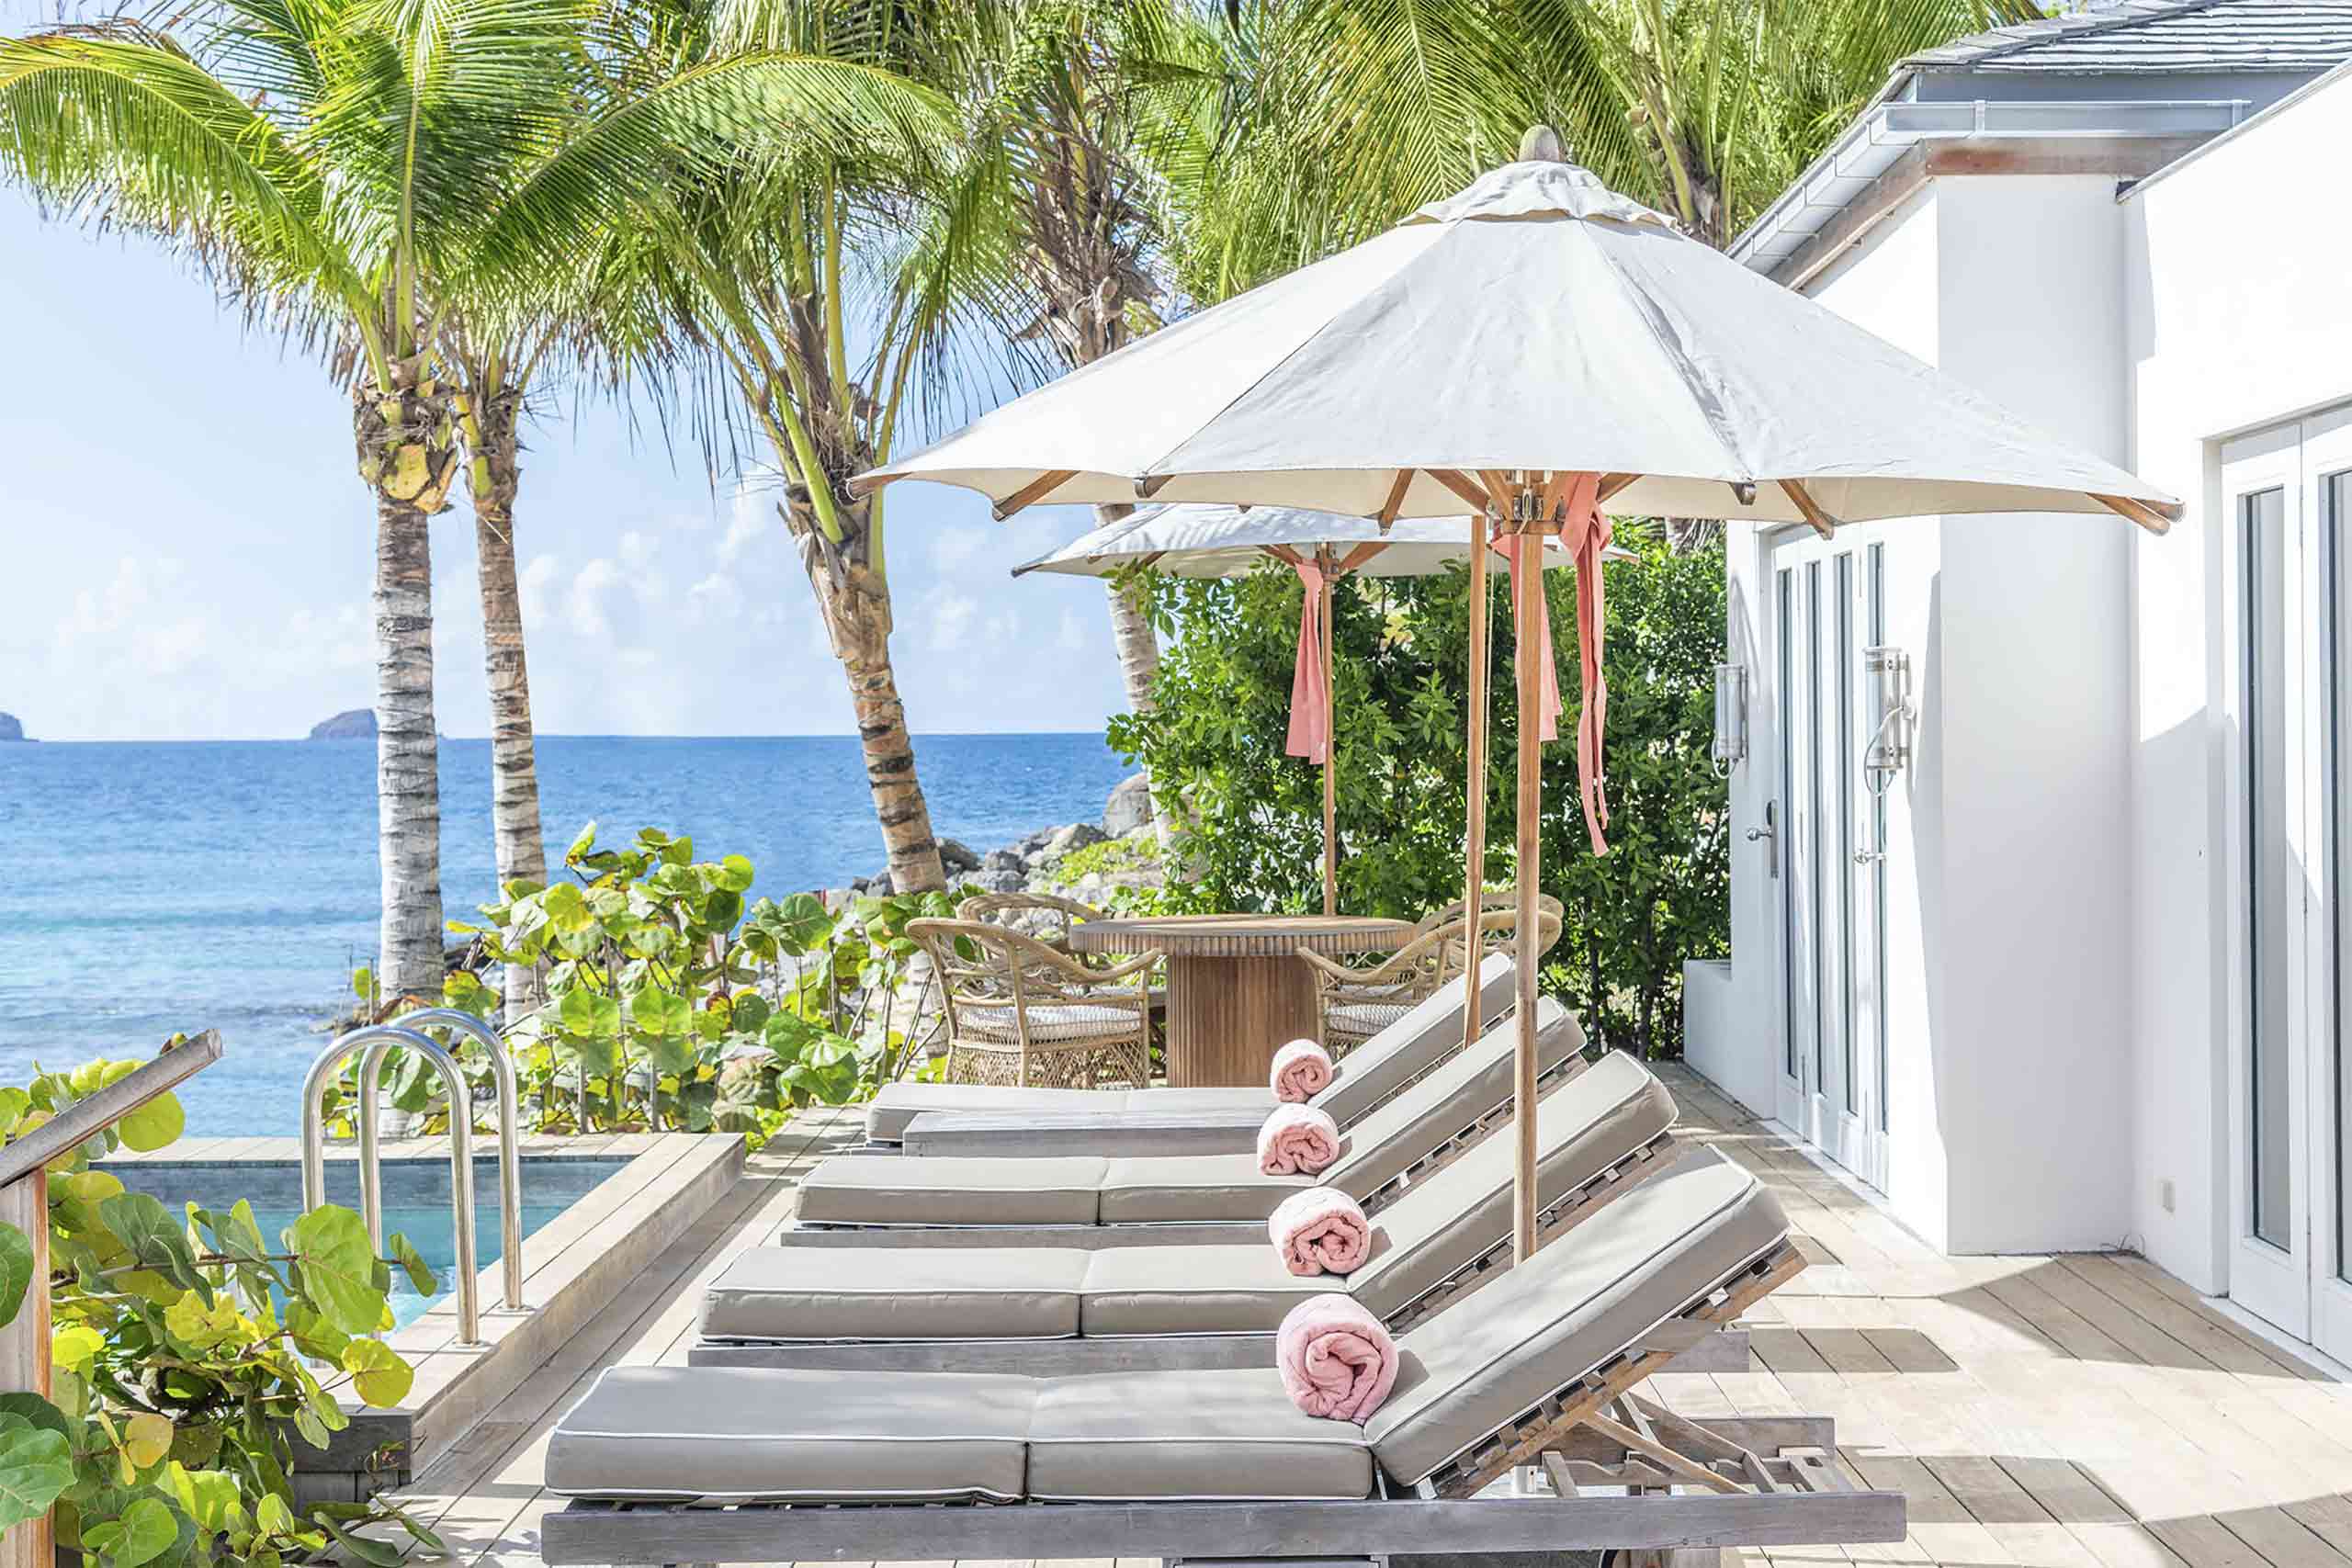 Poolside loungers with views over the Caribbean Sea at the Cheval Blanc St-Barth, Isle de France, St. Barts